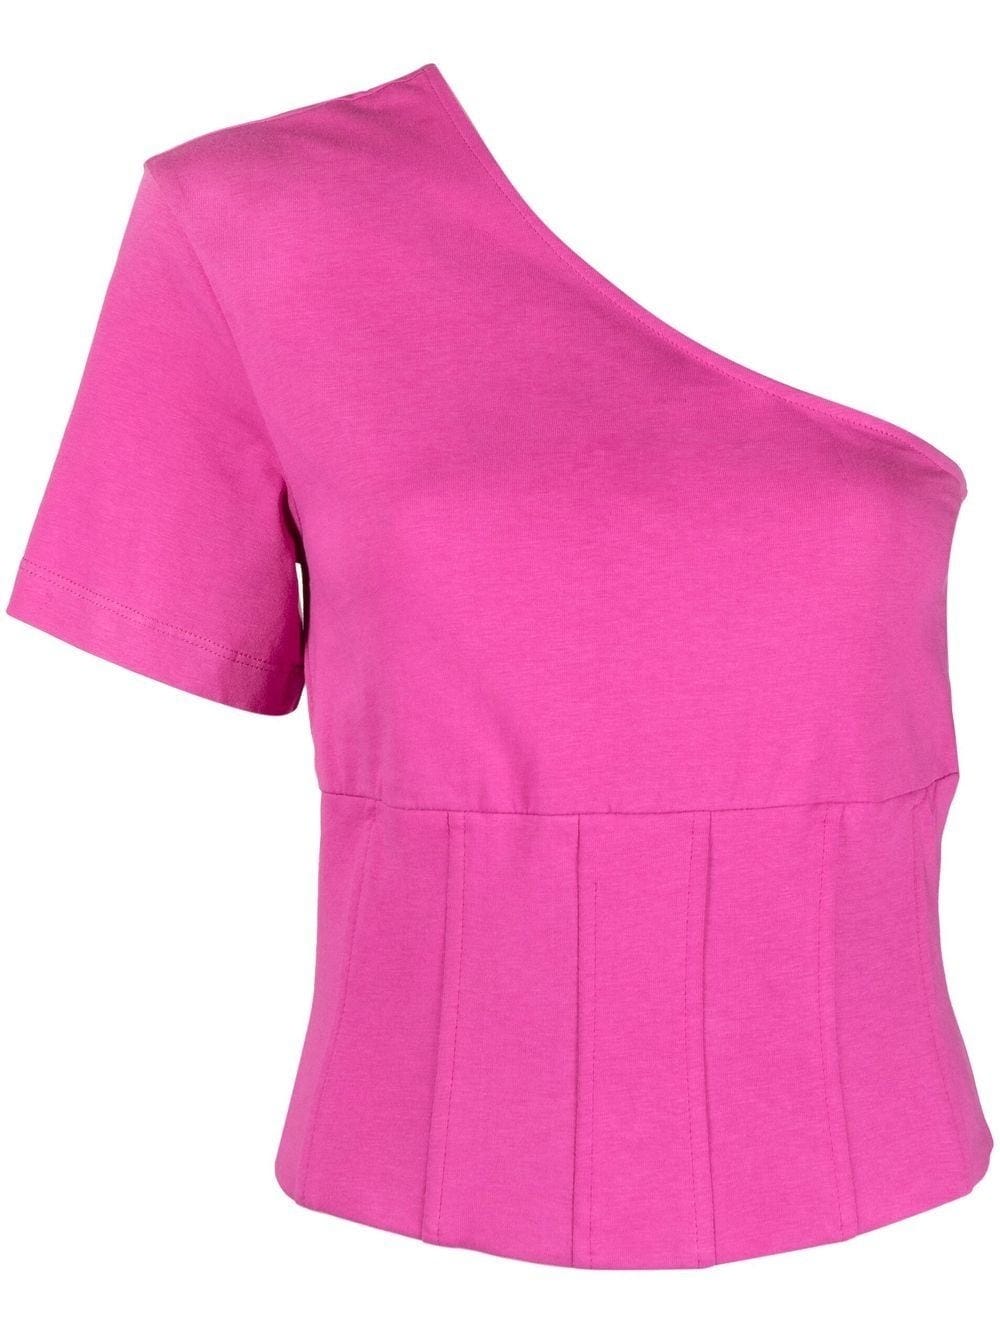 FEDERICA TOSI PINK ONE-SHOULDER T-SHIRT